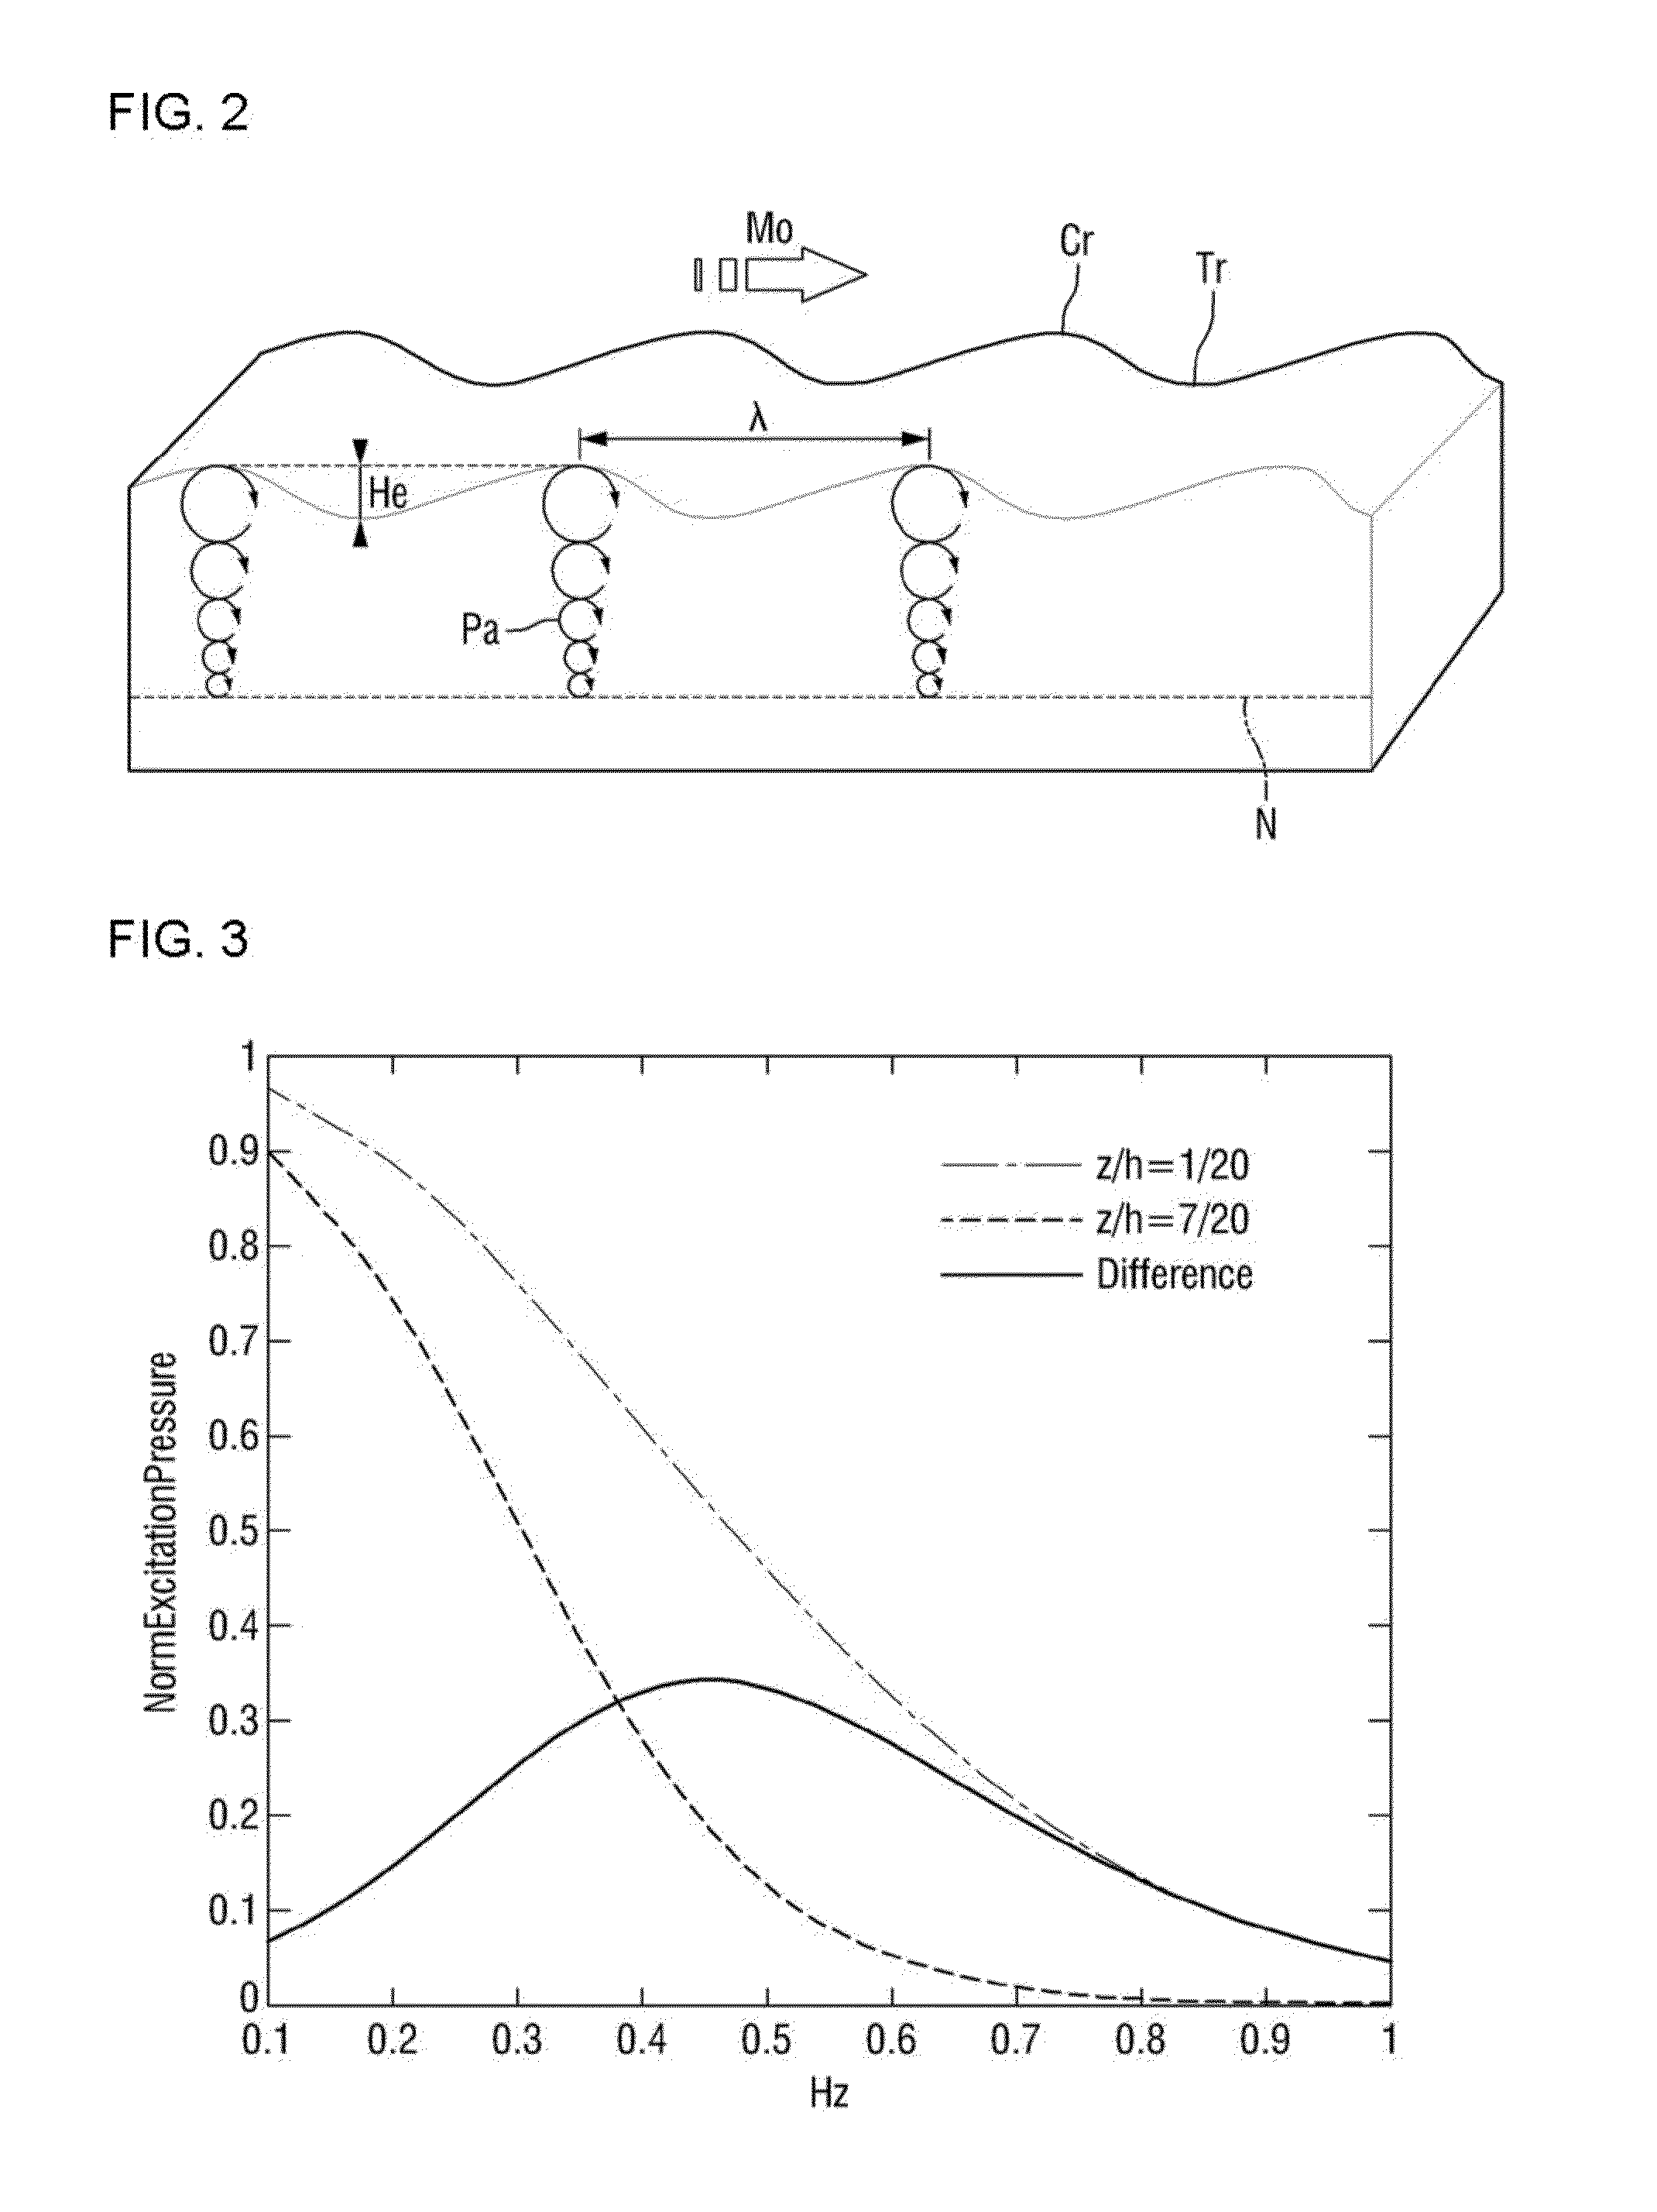 Apparatus and system for converting wave energy based on oscillating water column type